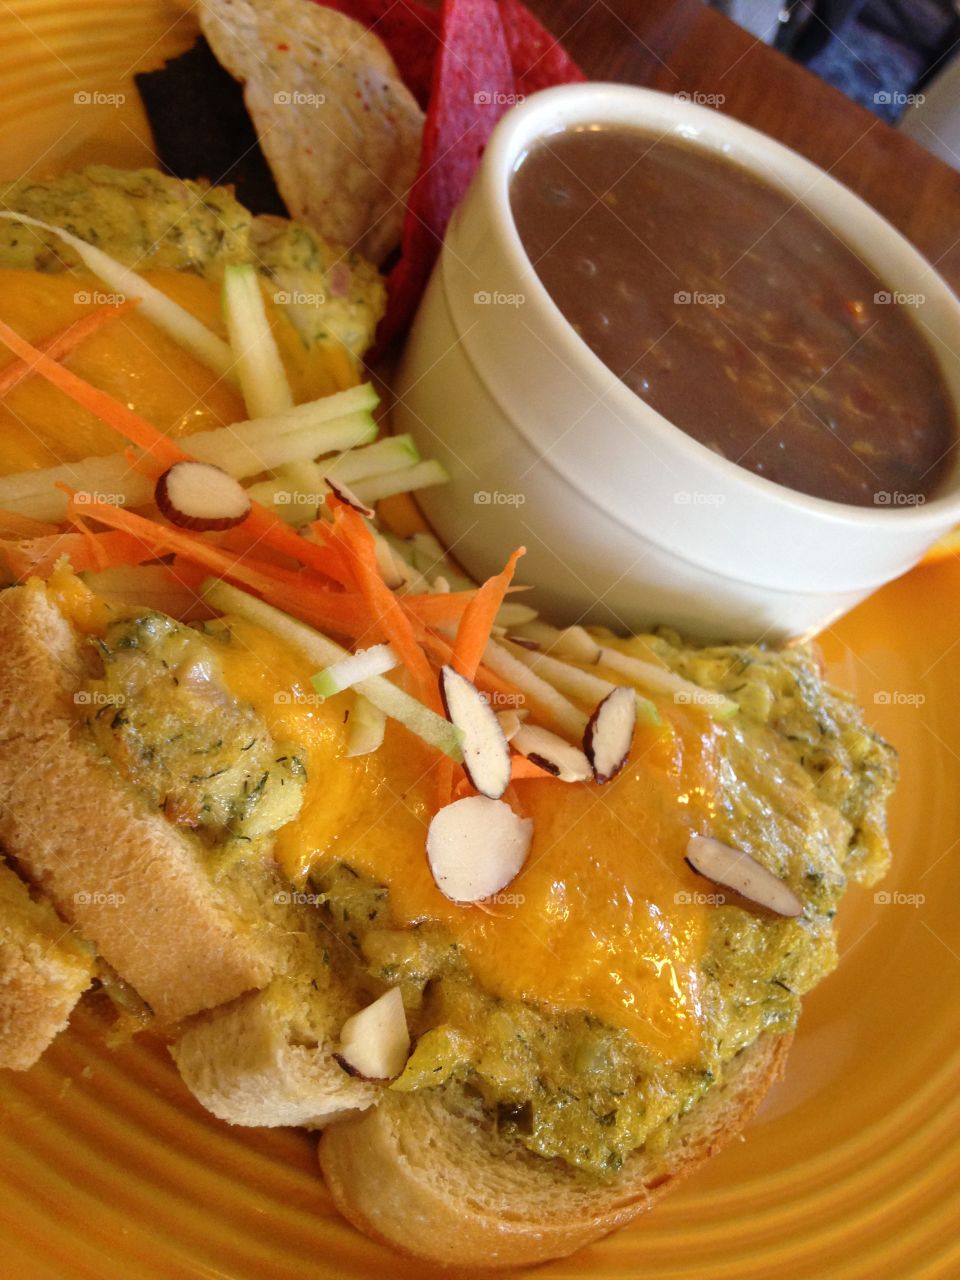 Open Face Albacore Tuna Melt and Fajita Black Bean Soup from Willow Springs Mercantile in historic downtown Excelsior Springs, Missouri 